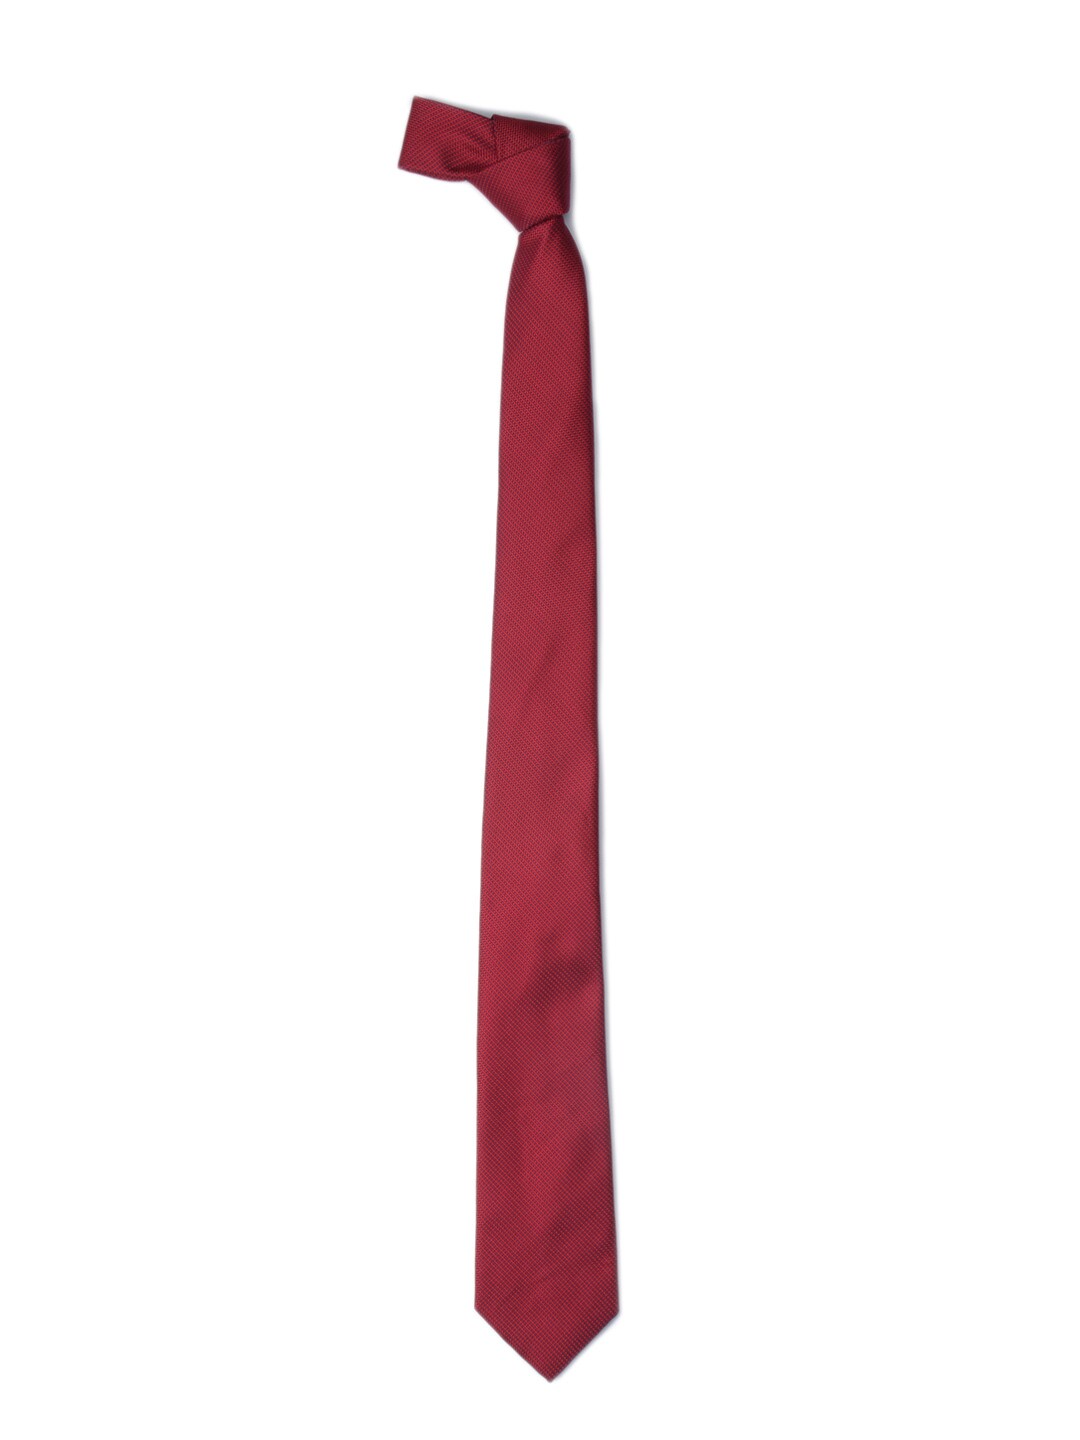 Park Avenue Red Patterned Tie